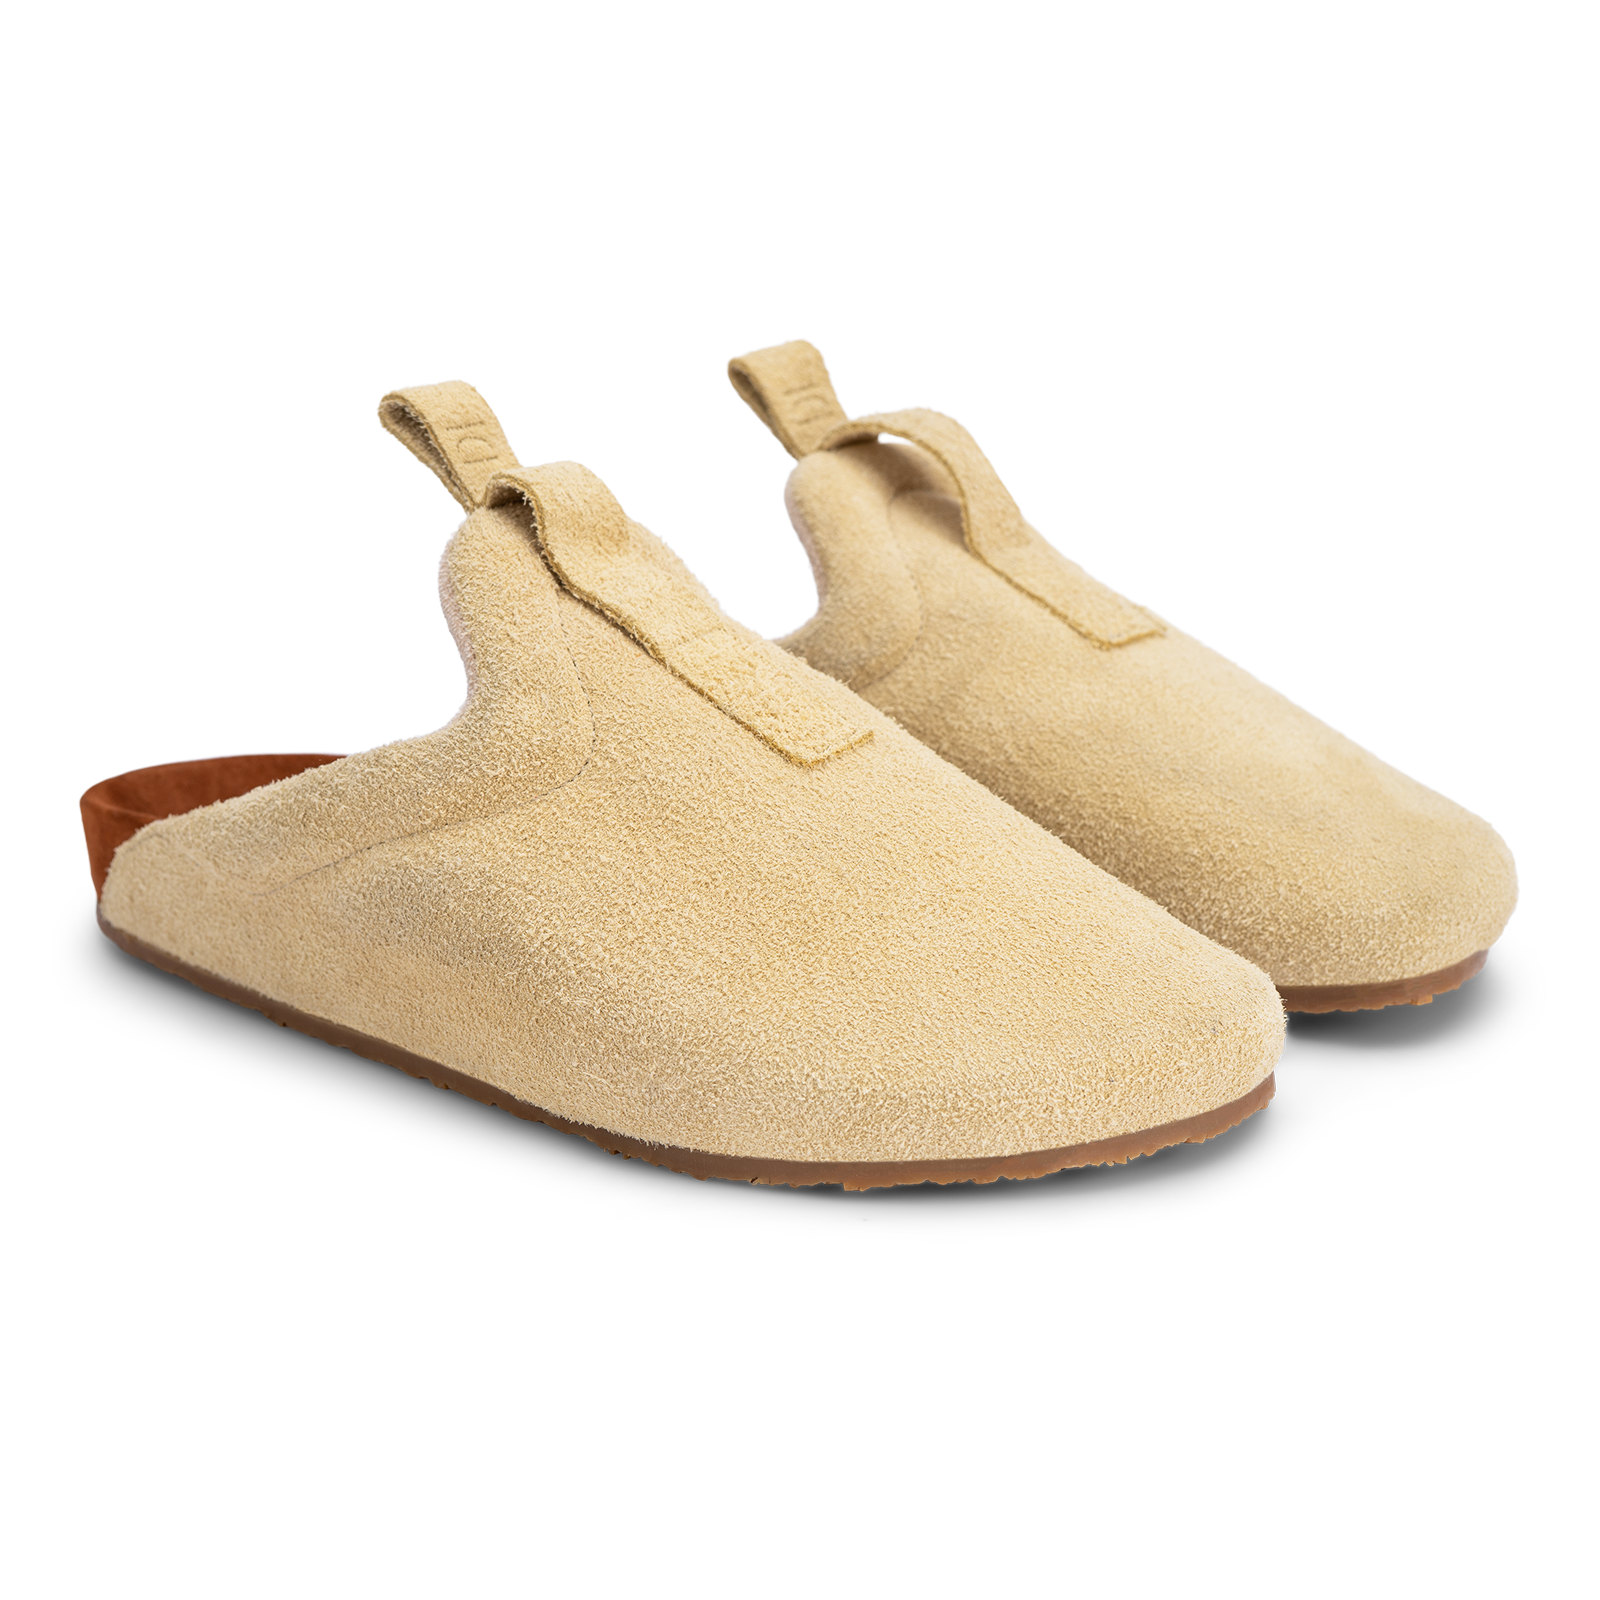 top 3/4 view beige suede upper, cork midsole wrapped in soft suede, Vibram sheet gum rubber outsole